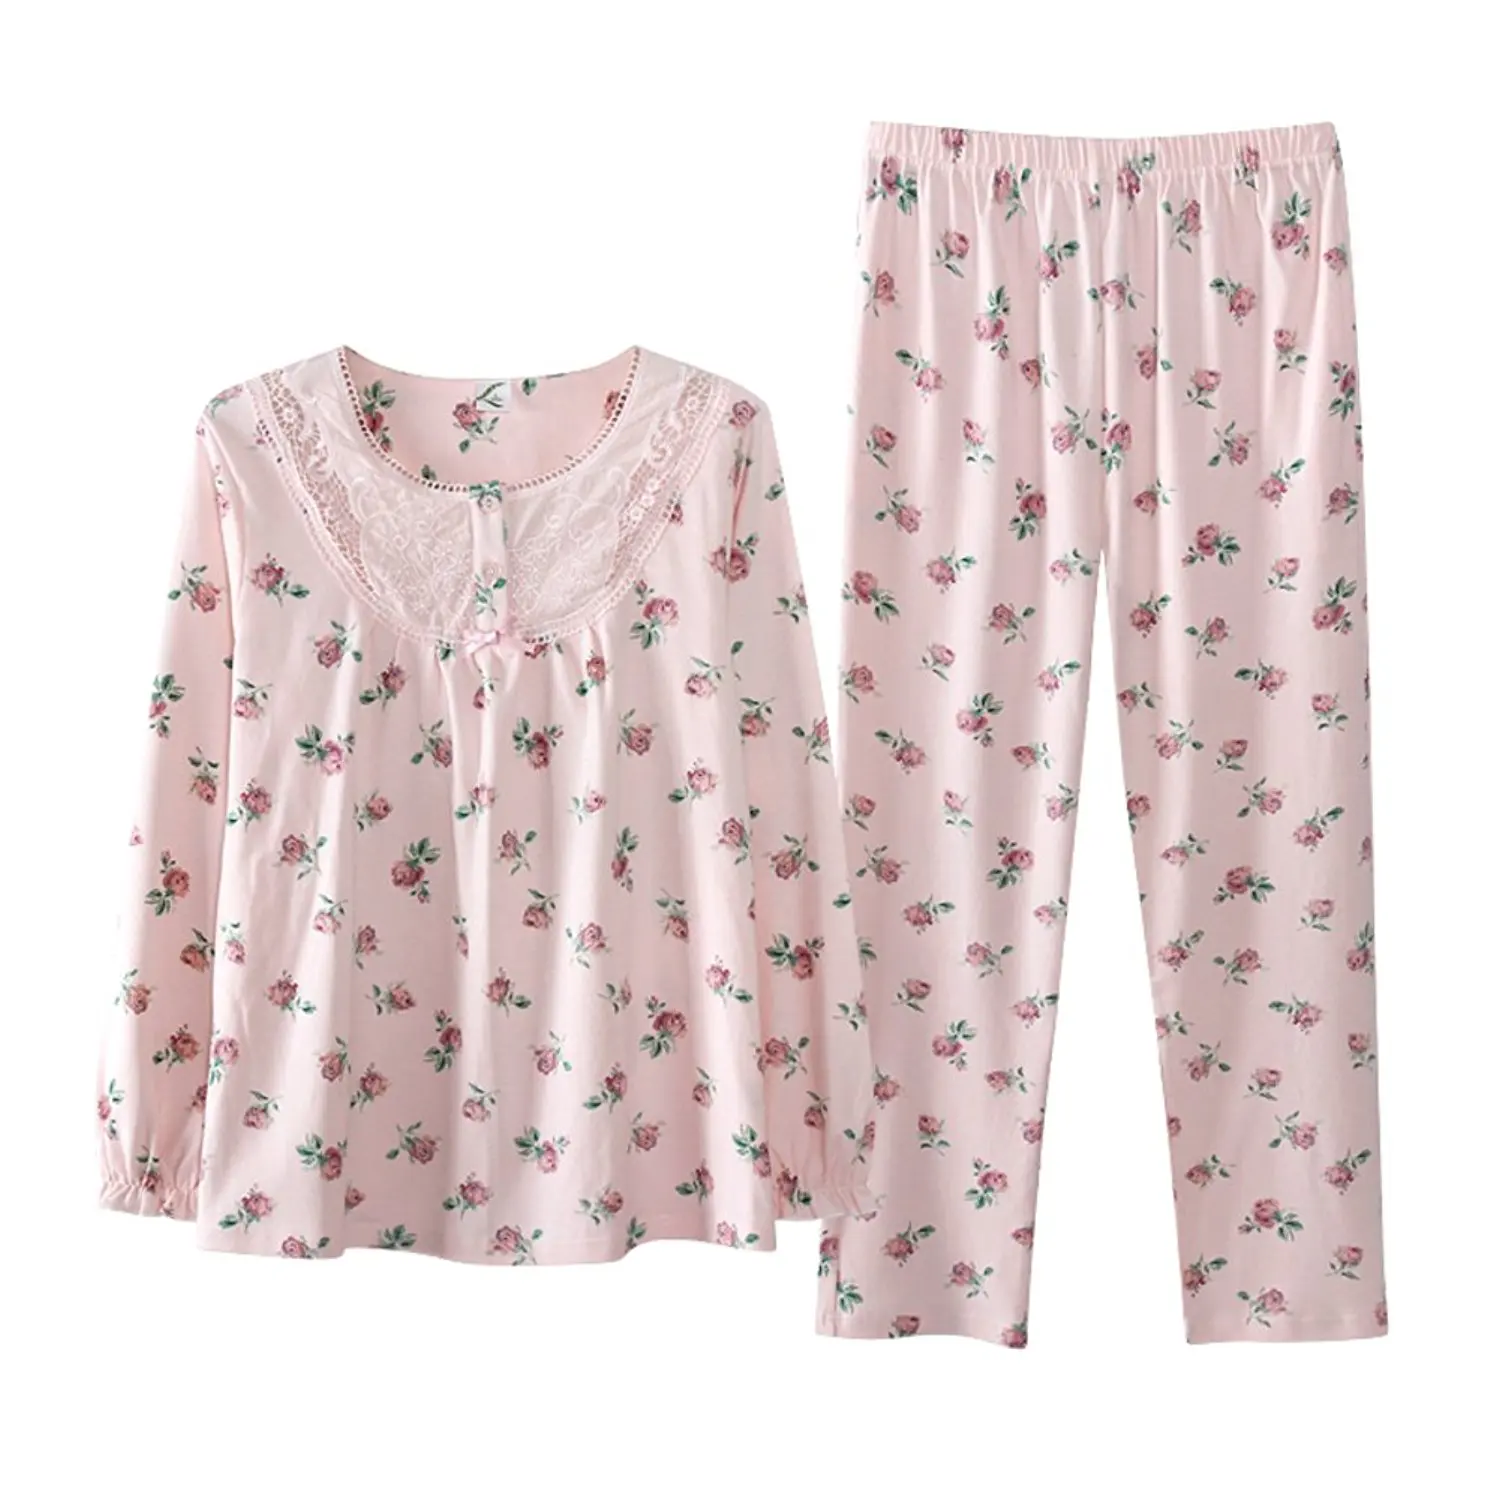 Cheap Cotton Housecoat, find Cotton Housecoat deals on line at Alibaba.com